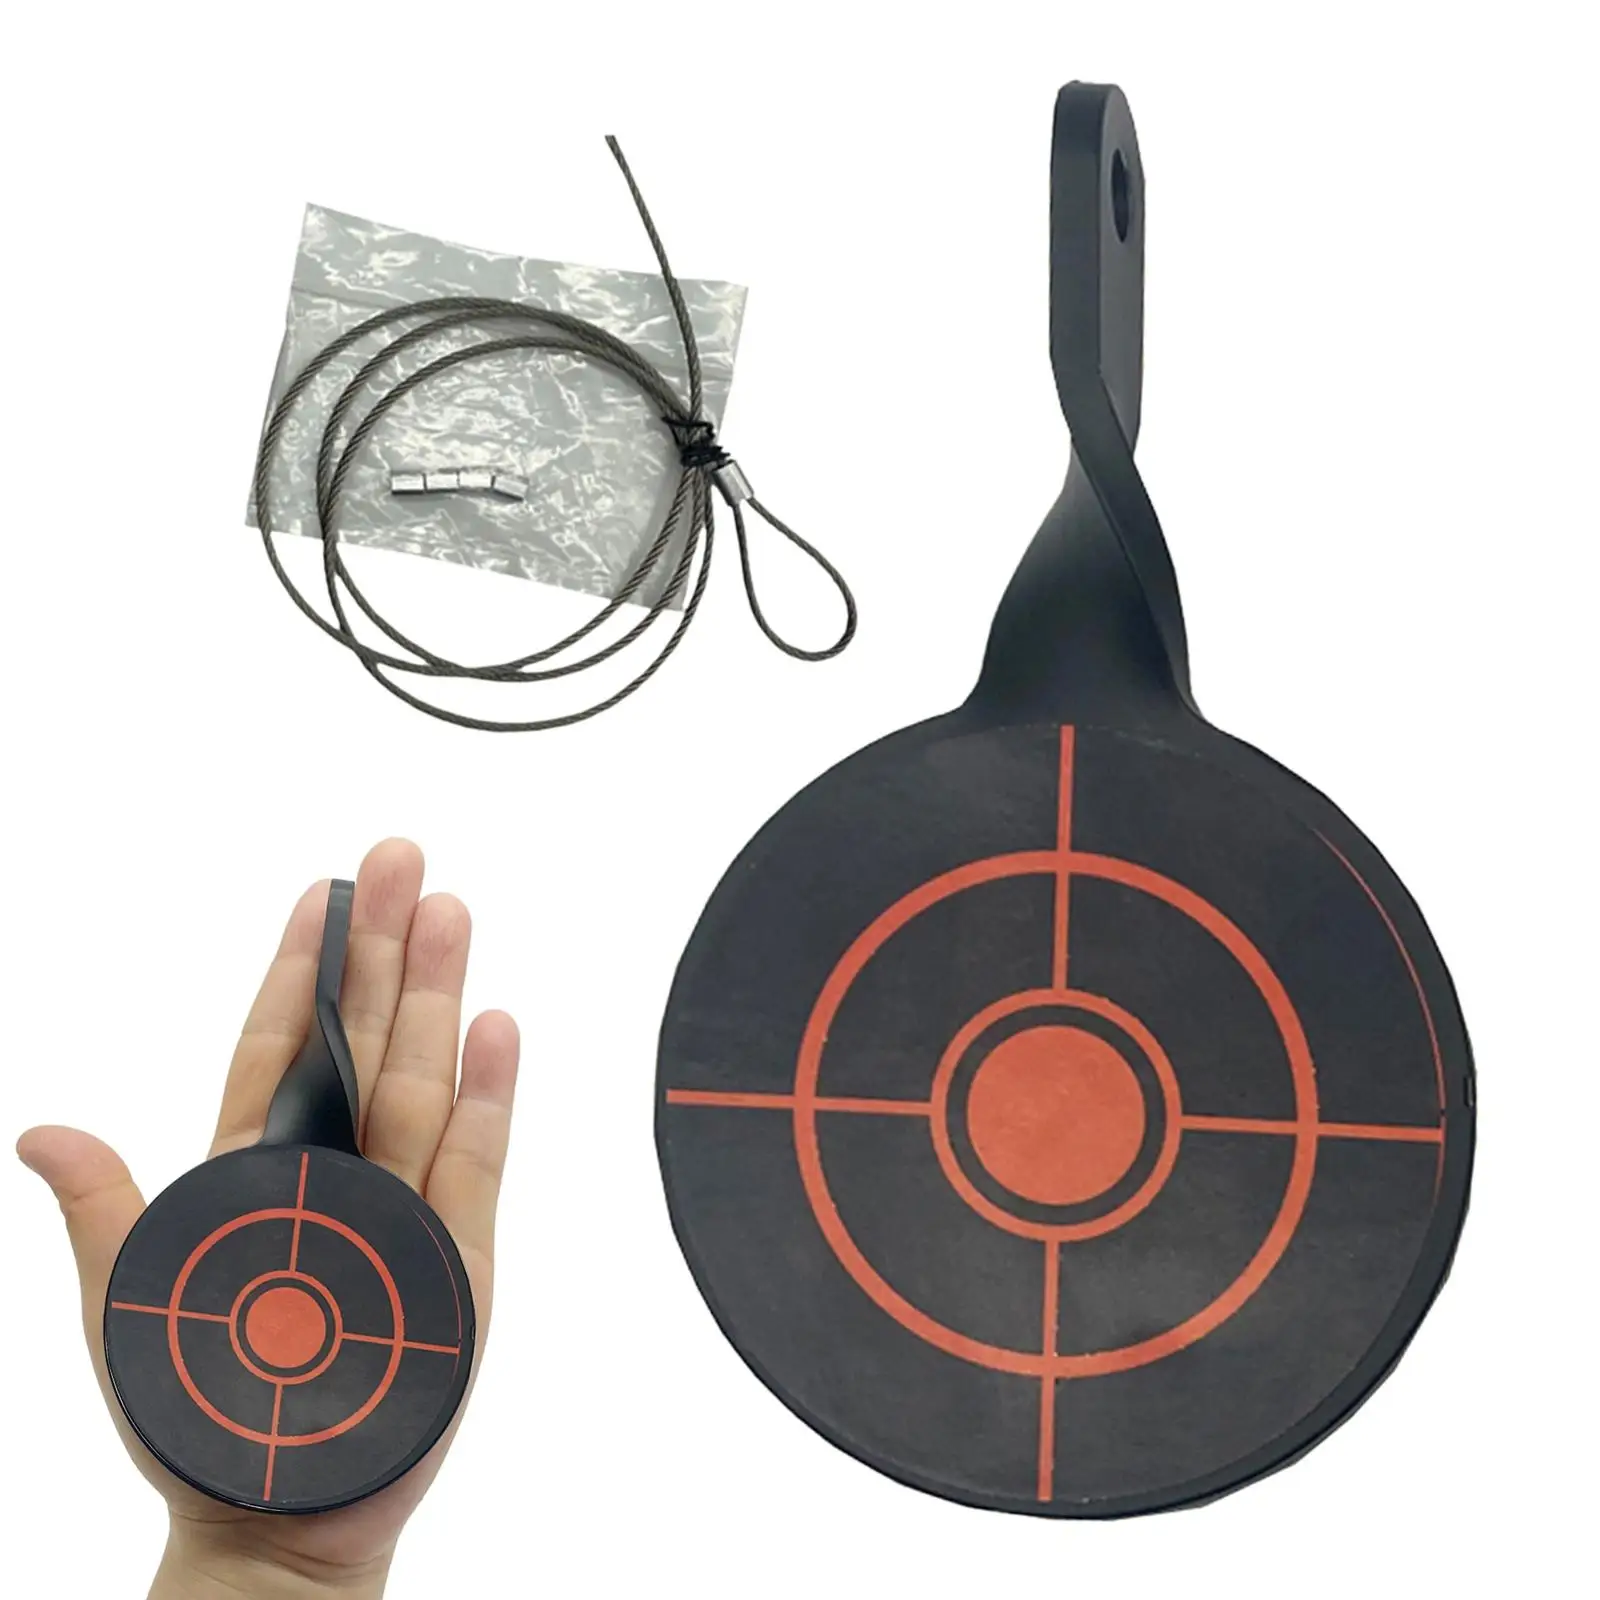  Target Plate Round 3inch Resetting Plinking Target Hunting